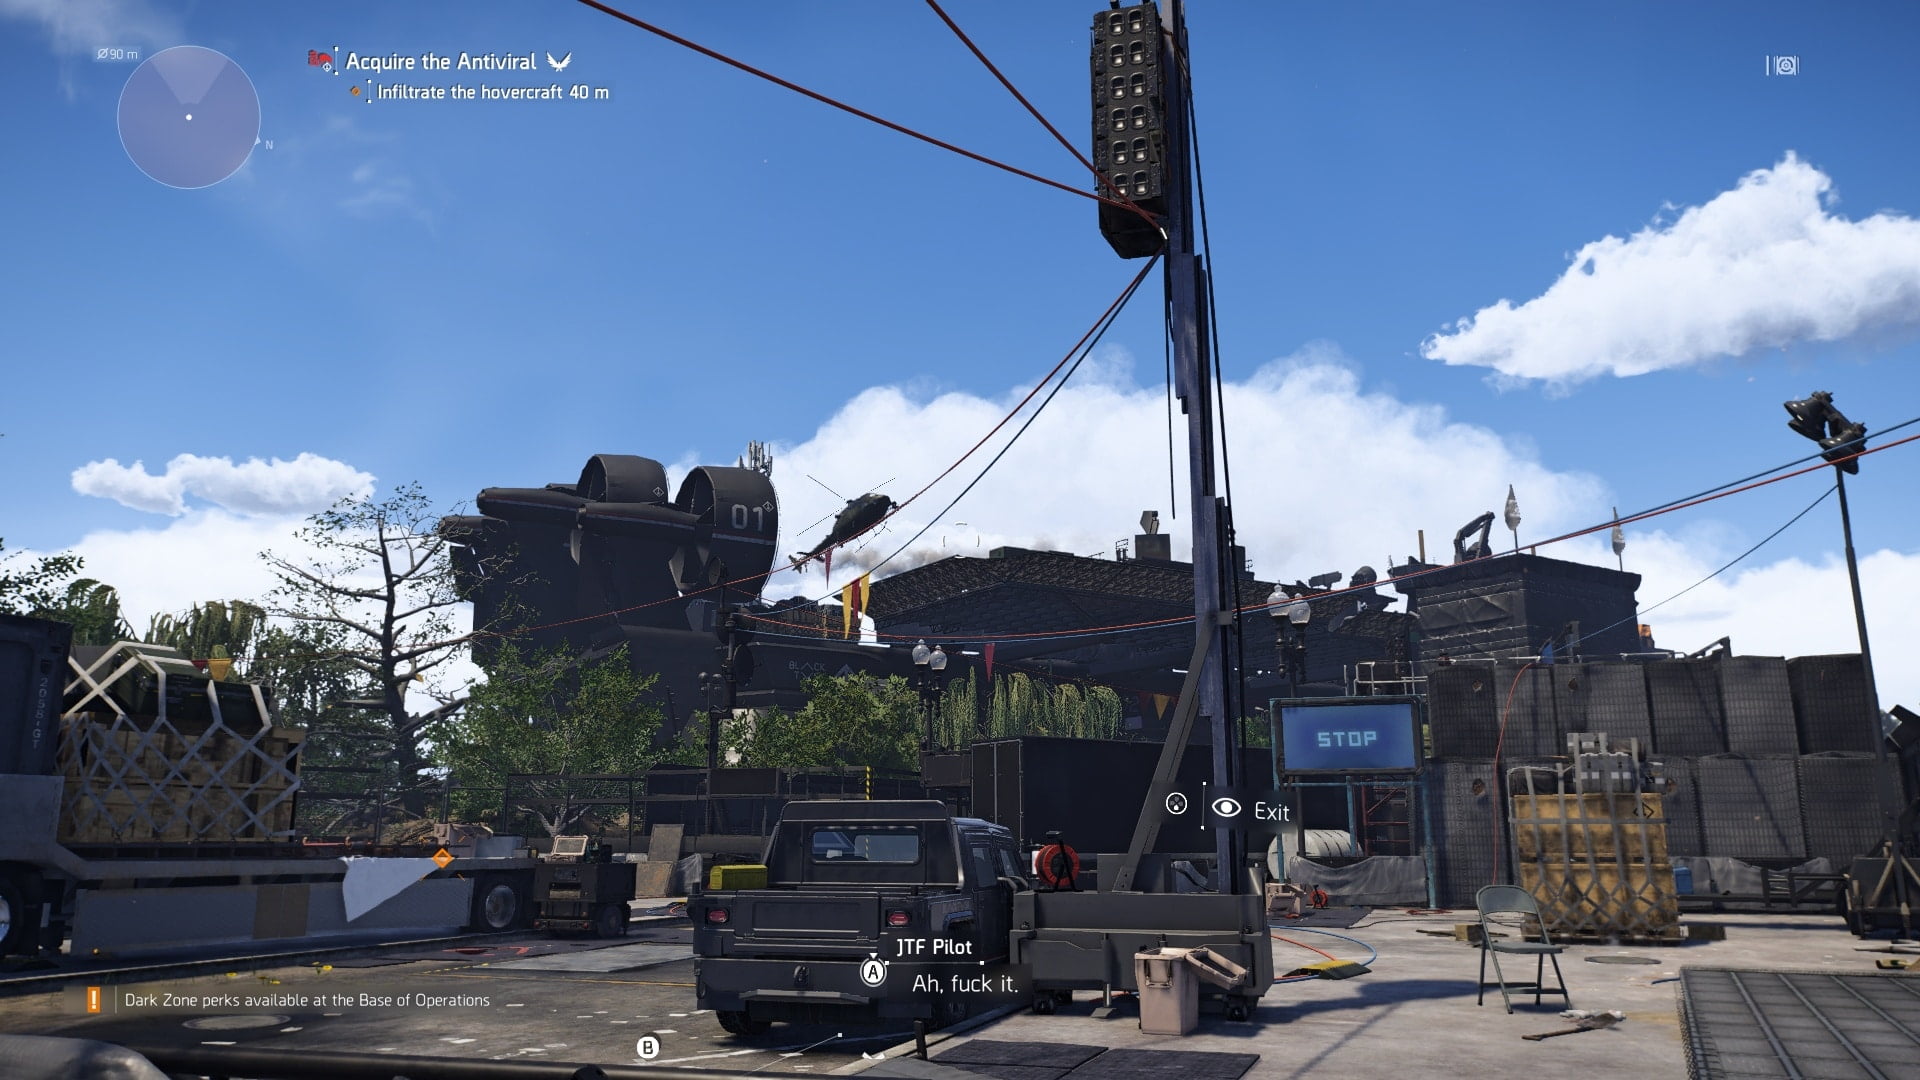 TheDivision2 5 18 2019 6 25 29 PM 280